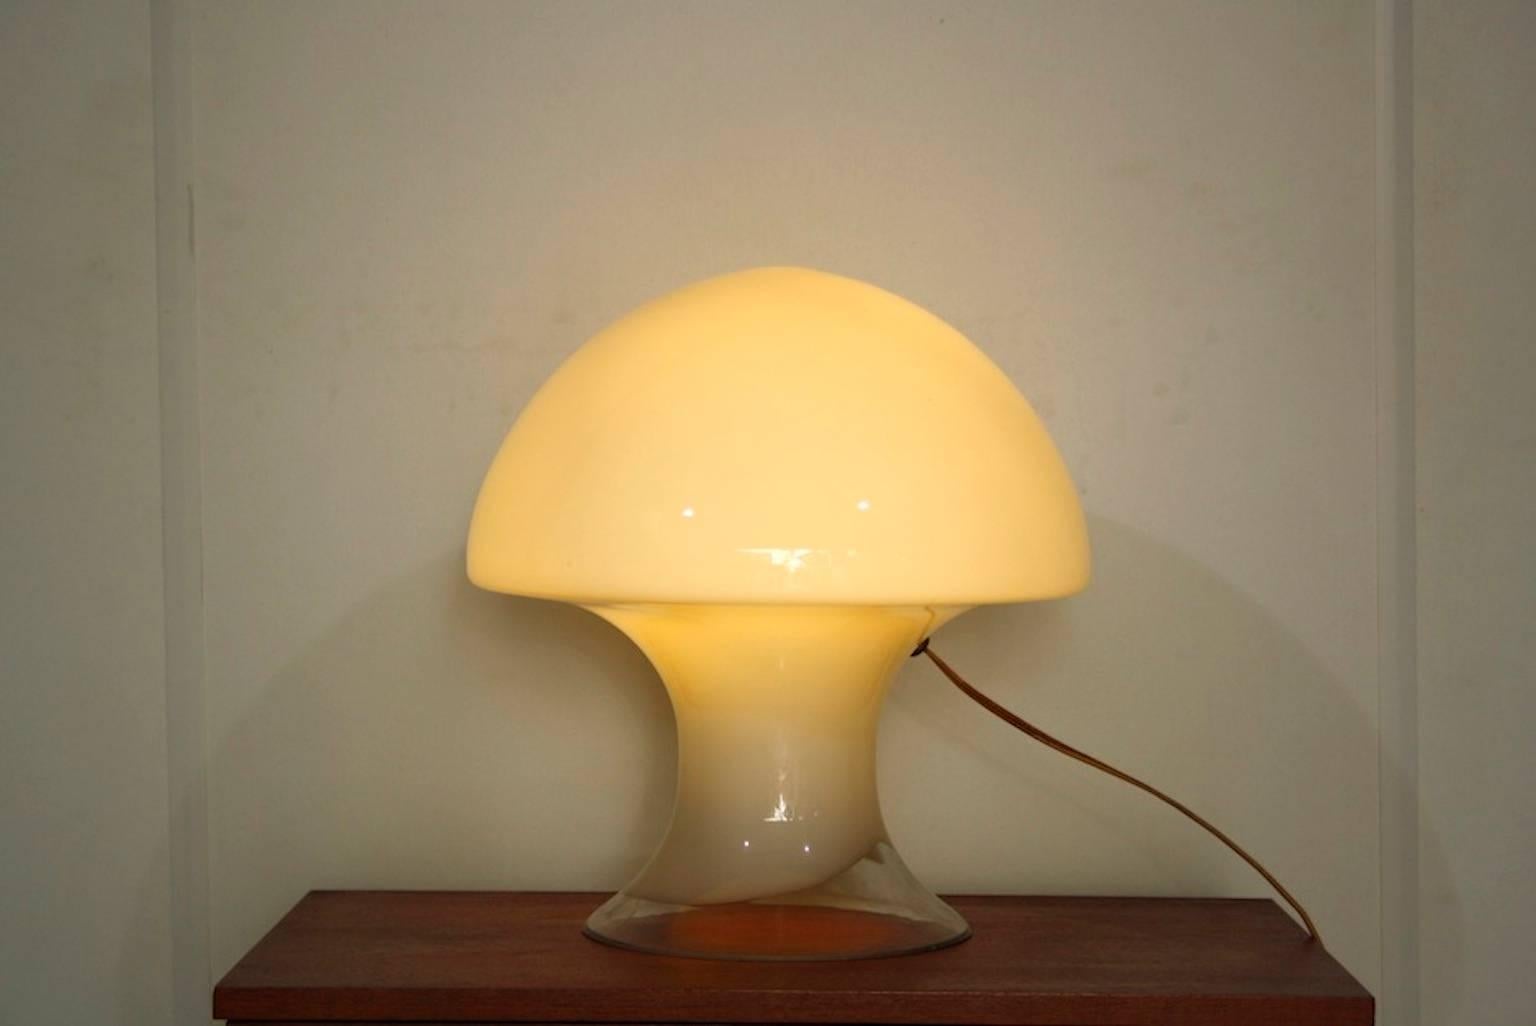 White and transparent Murano glass table lamp by Gino Vistosi
With original wiring. 

All our lights are checked and tested. Because of the lower voltage standard in the USA (110v vs 220v), European lighting can be safely used in the USA. If a